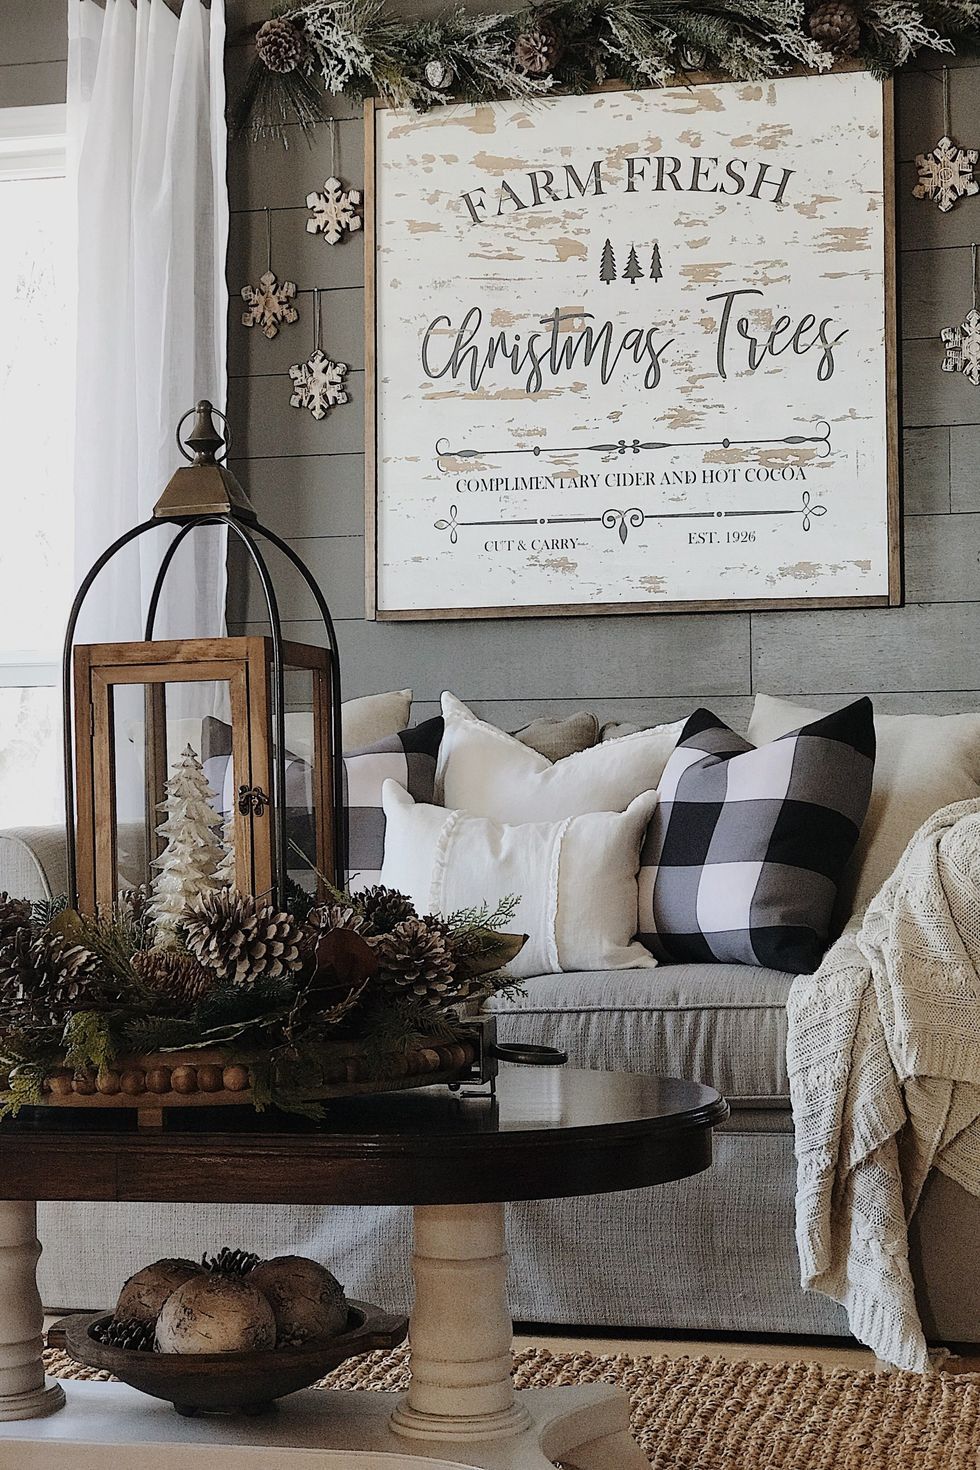 https://hips.hearstapps.com/hmg-prod/images/rustic-christmas-decorations-living-room-sign-1637172351.jpeg?crop=1xw:1xh;center,top&resize=980:*